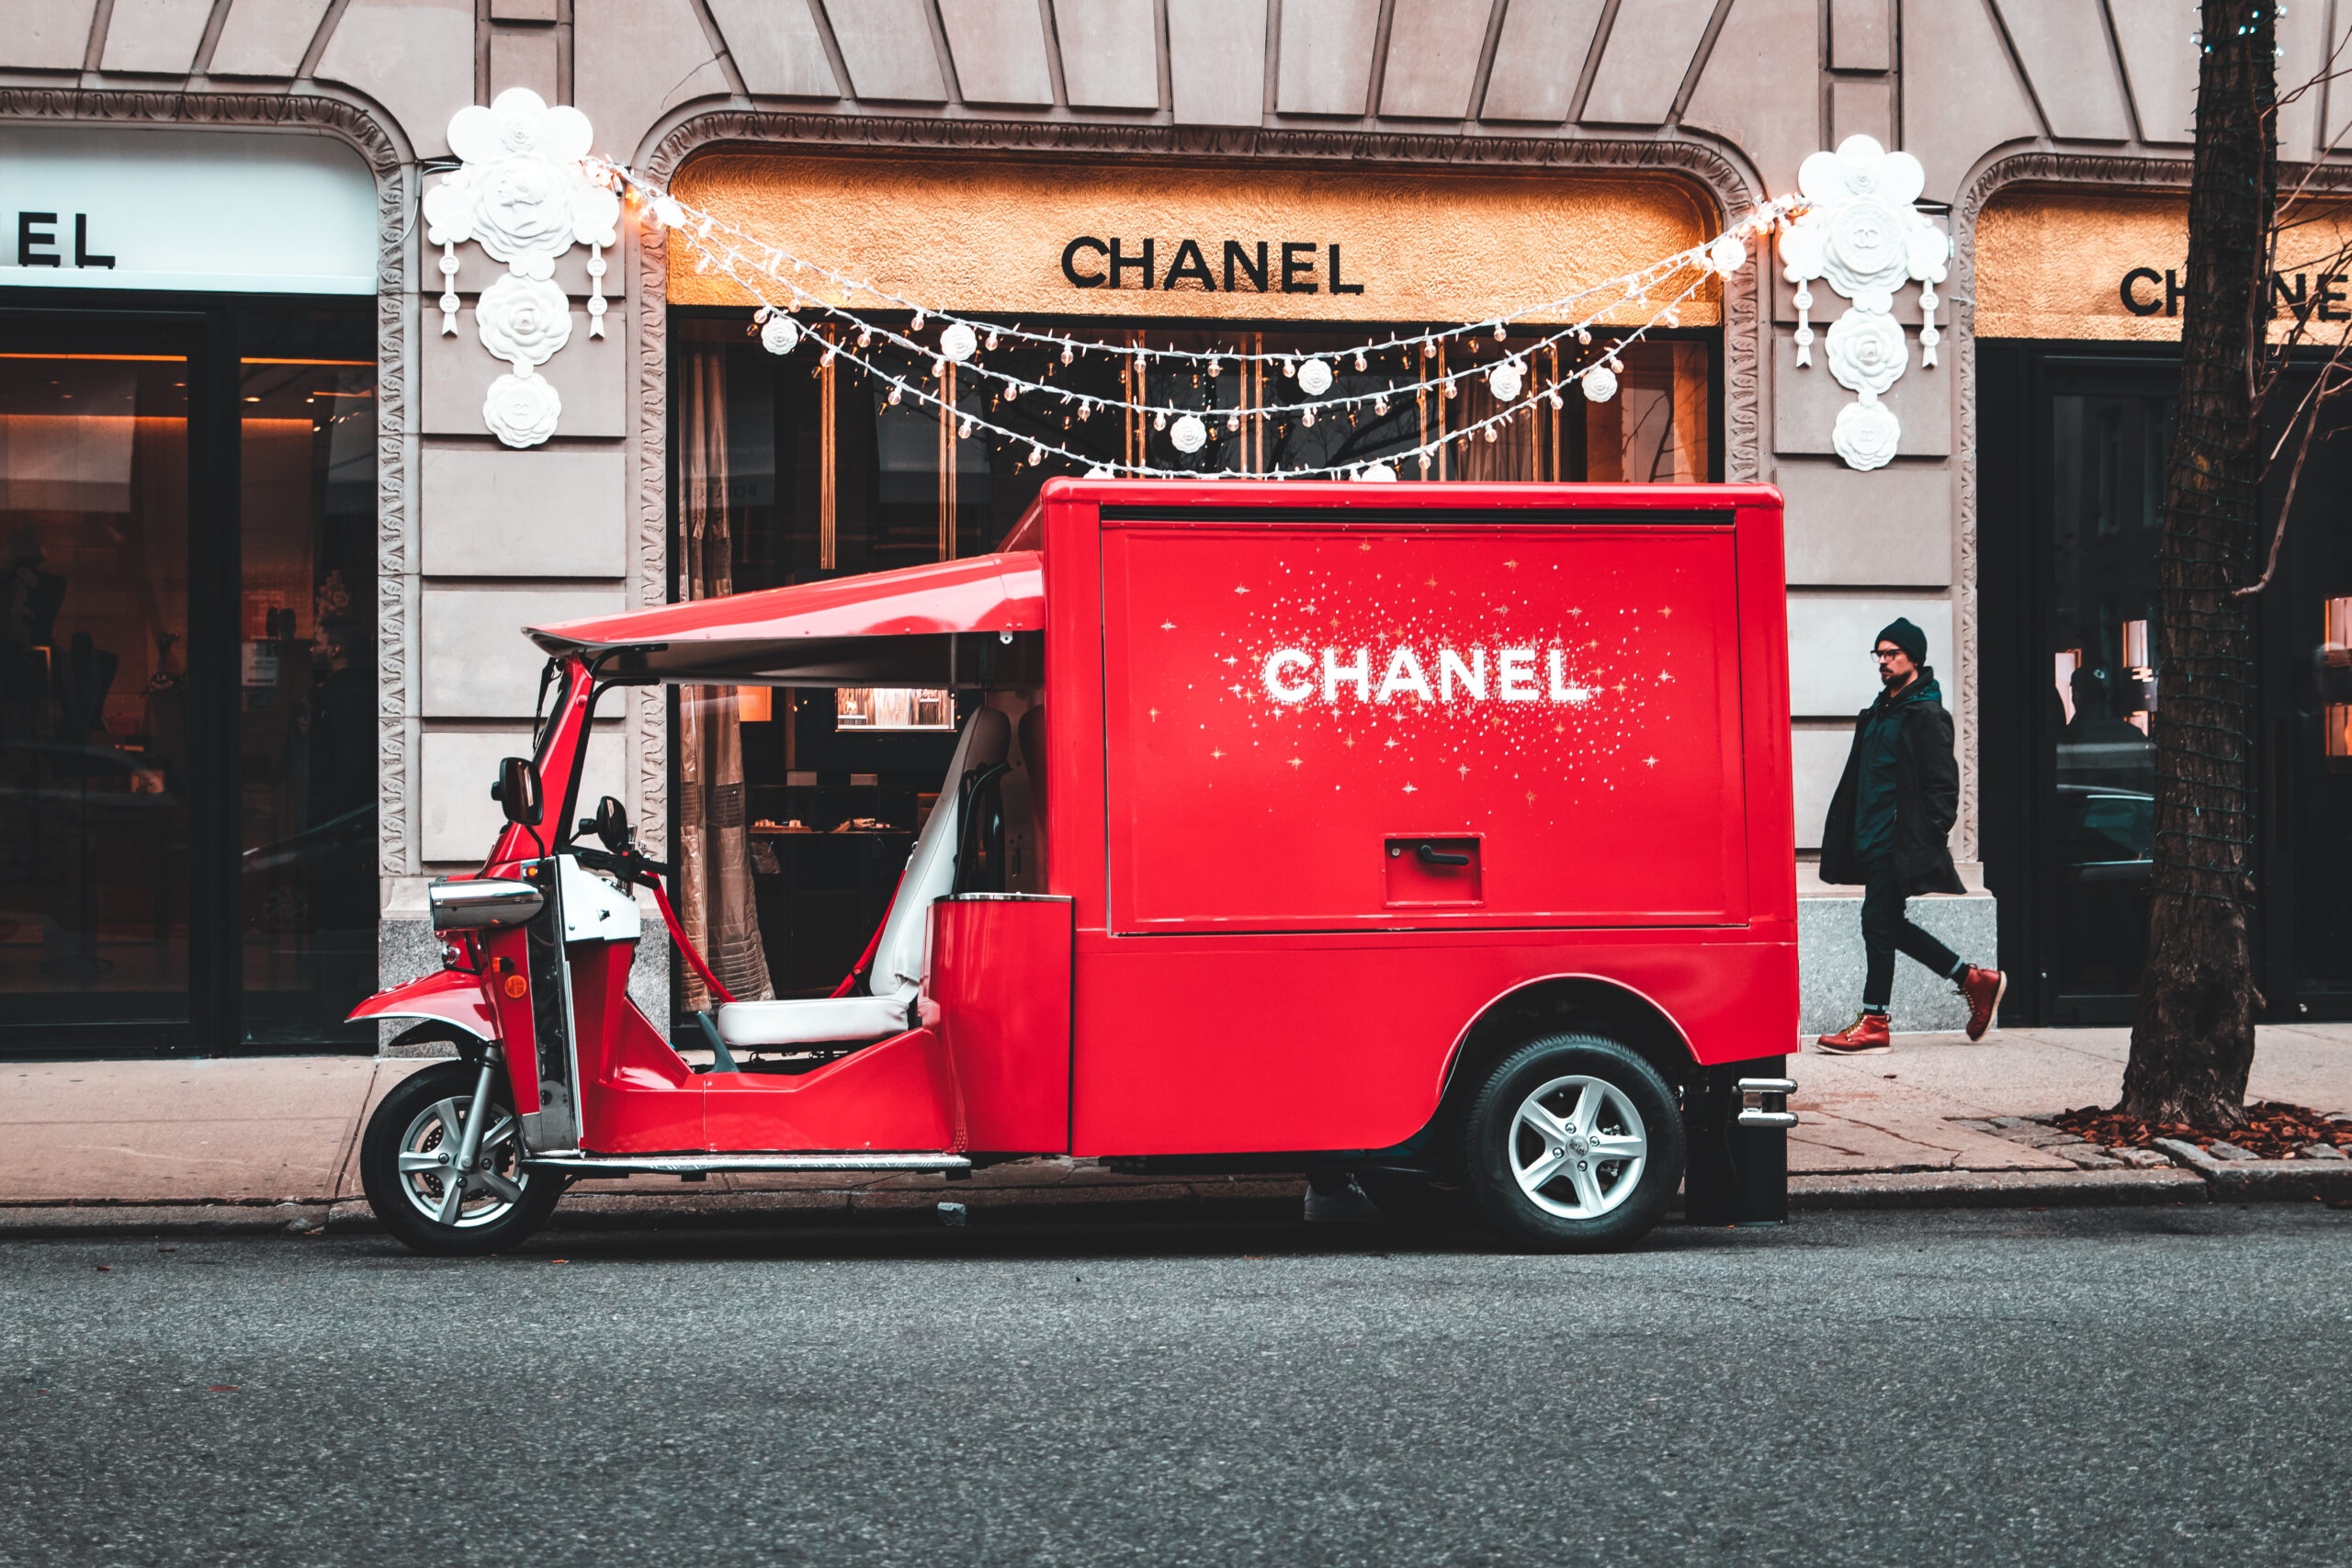 Chanel Food Truck for Holiday Marketing